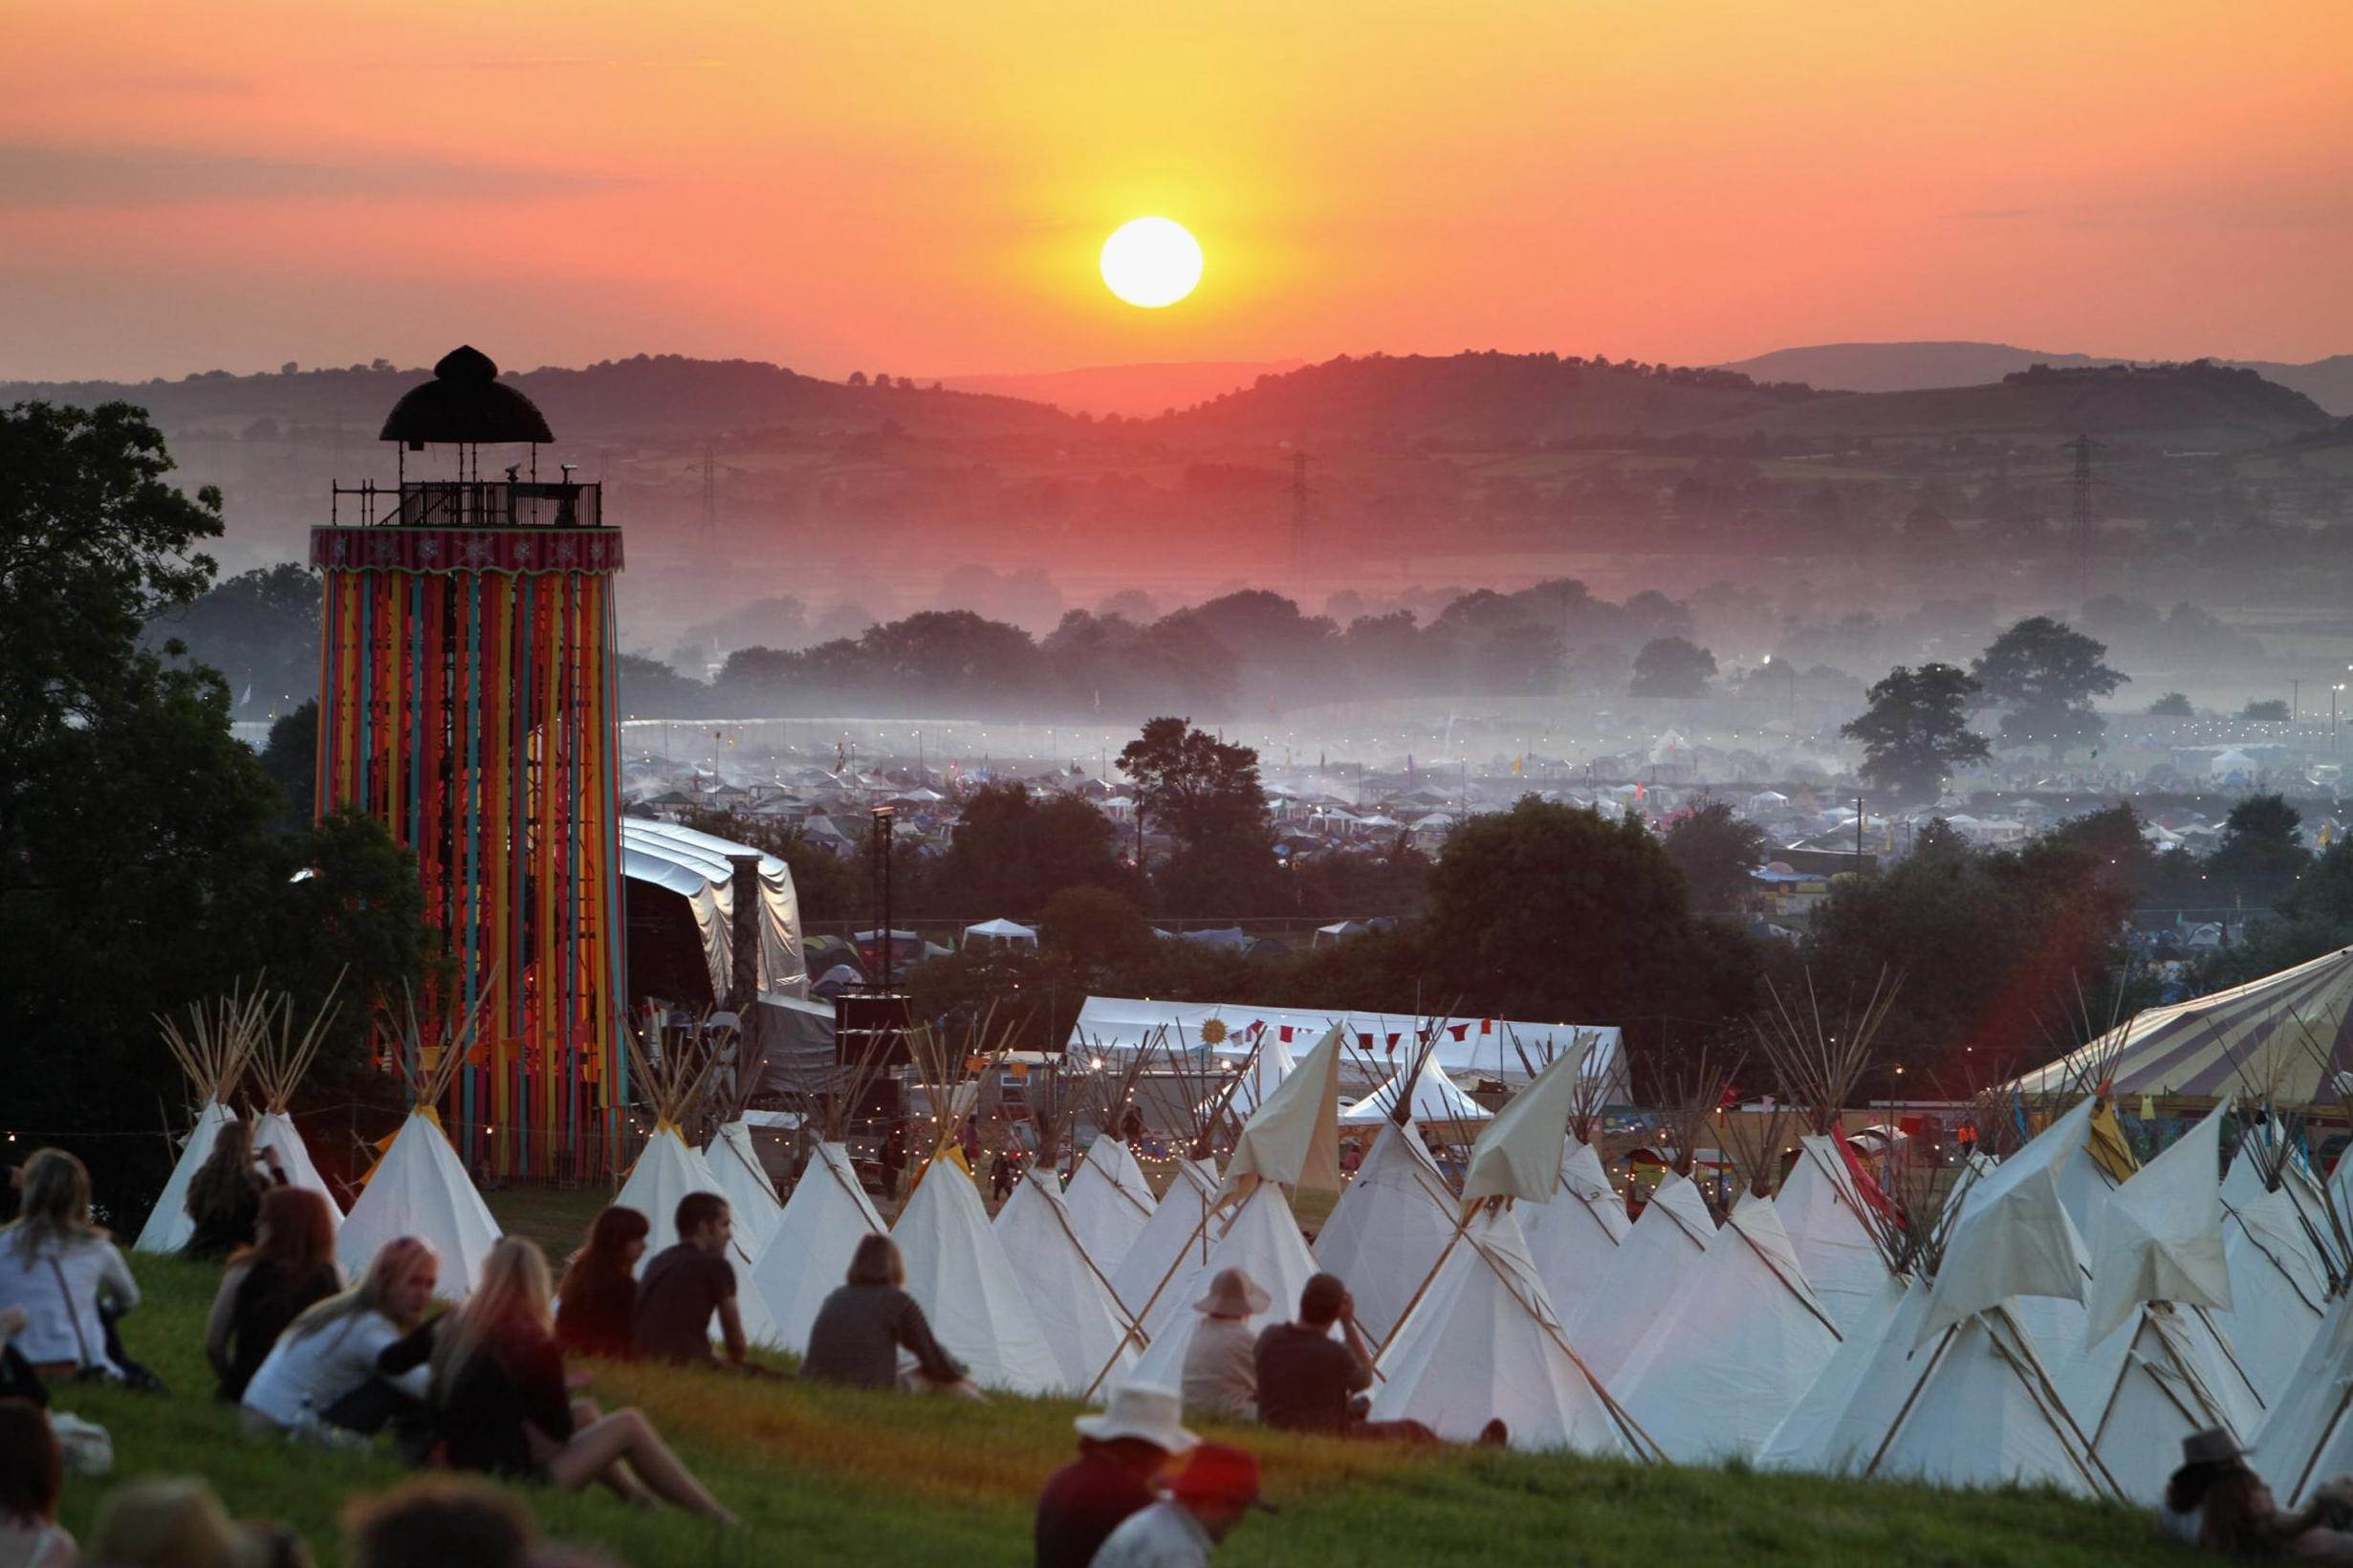 People gather to watch the sunset on a hill above the tipi field at Glastonbury in 2009